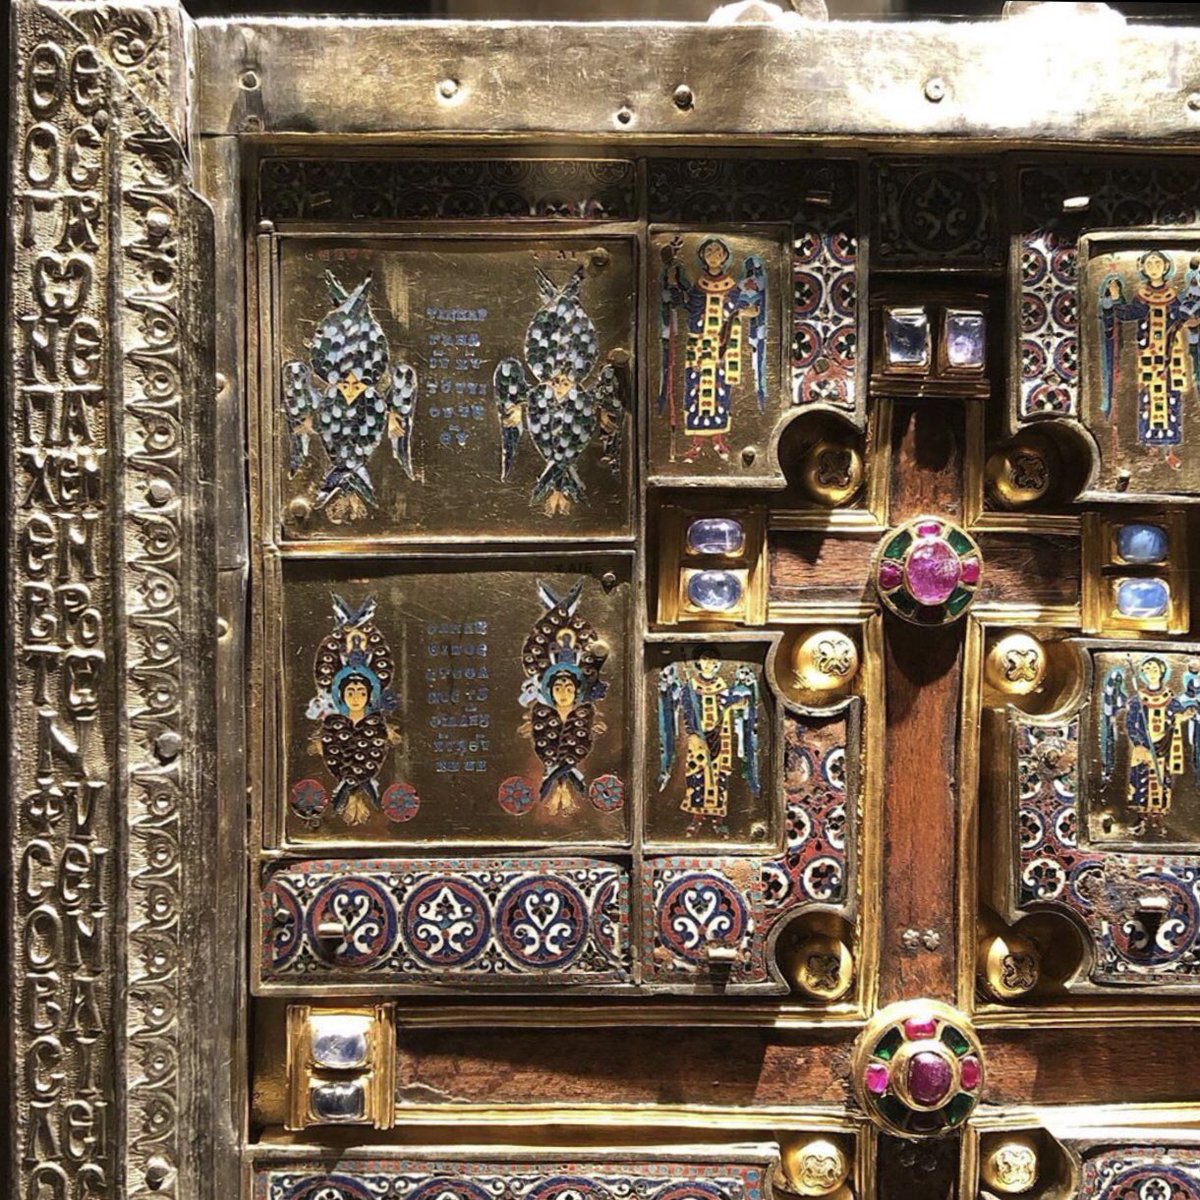 The Limburg Staurotheke, ca. 959 CE (relic of the True Cross) and ca. 967 CE (box and sliding lid). Sycamore wood, gold, gilded silver, precious gems, cloisonné enamel, and 10 additional relics (Diözesanmuseum, Limburg an der Lahn, Inv. D 1)  #staurotheke  #staurothek  #limburg